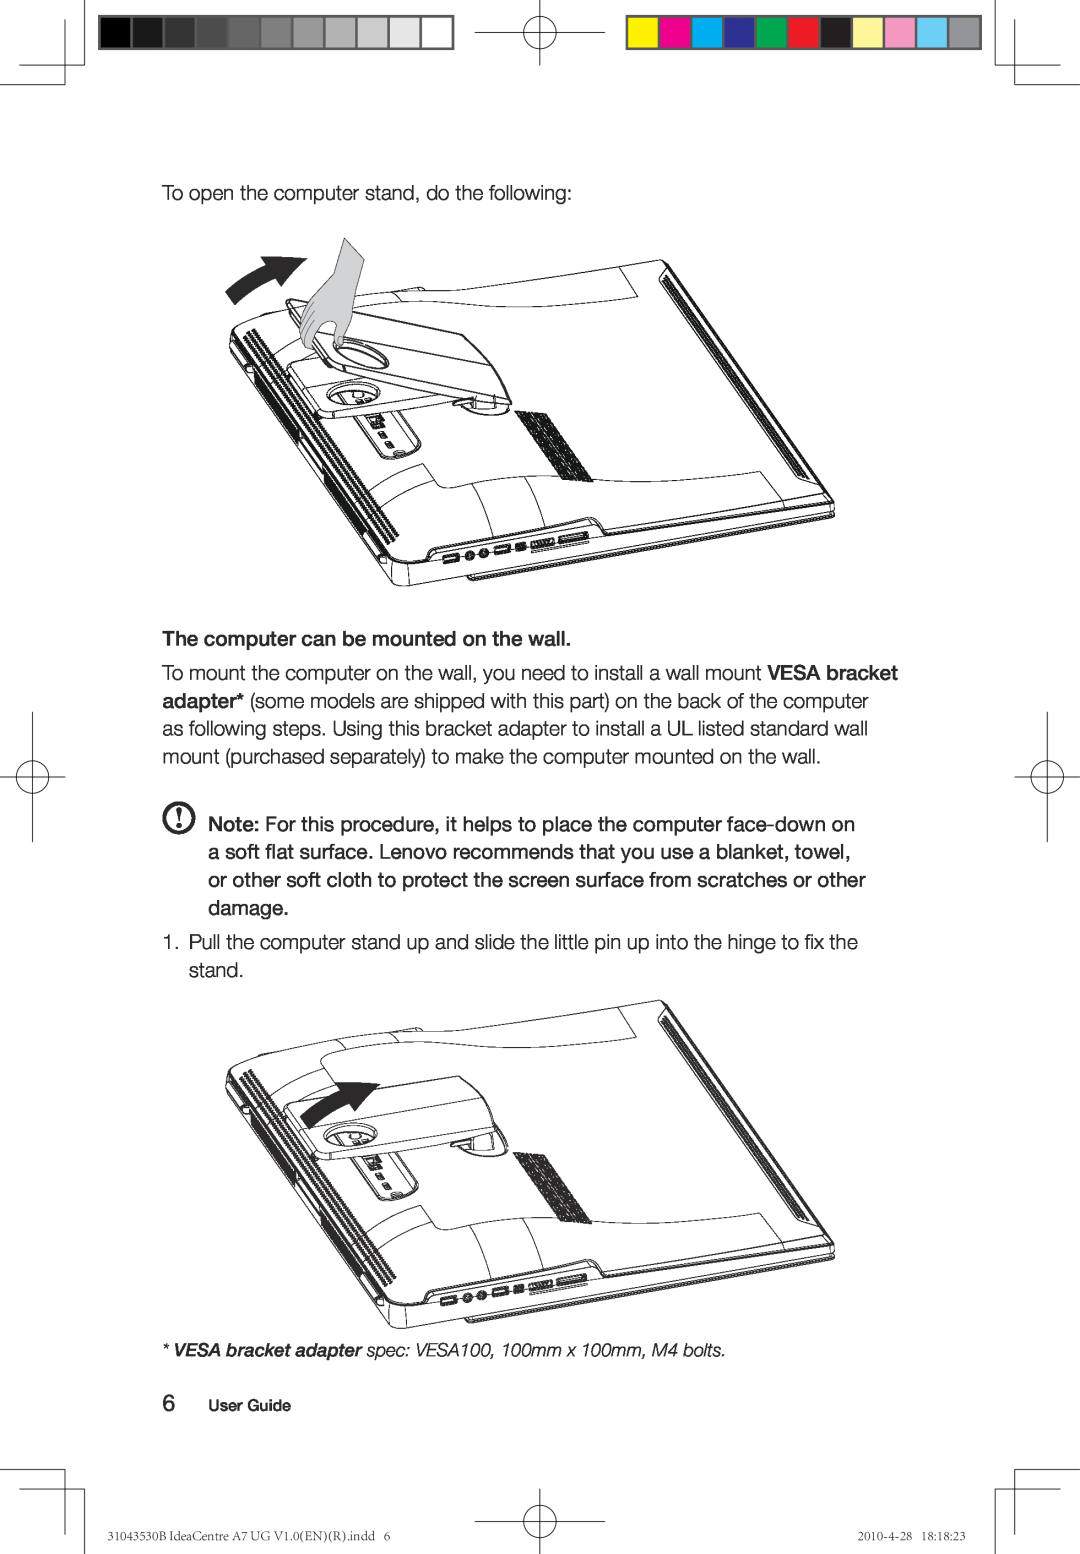 Lenovo A7 manual To open the computer stand, do the following 